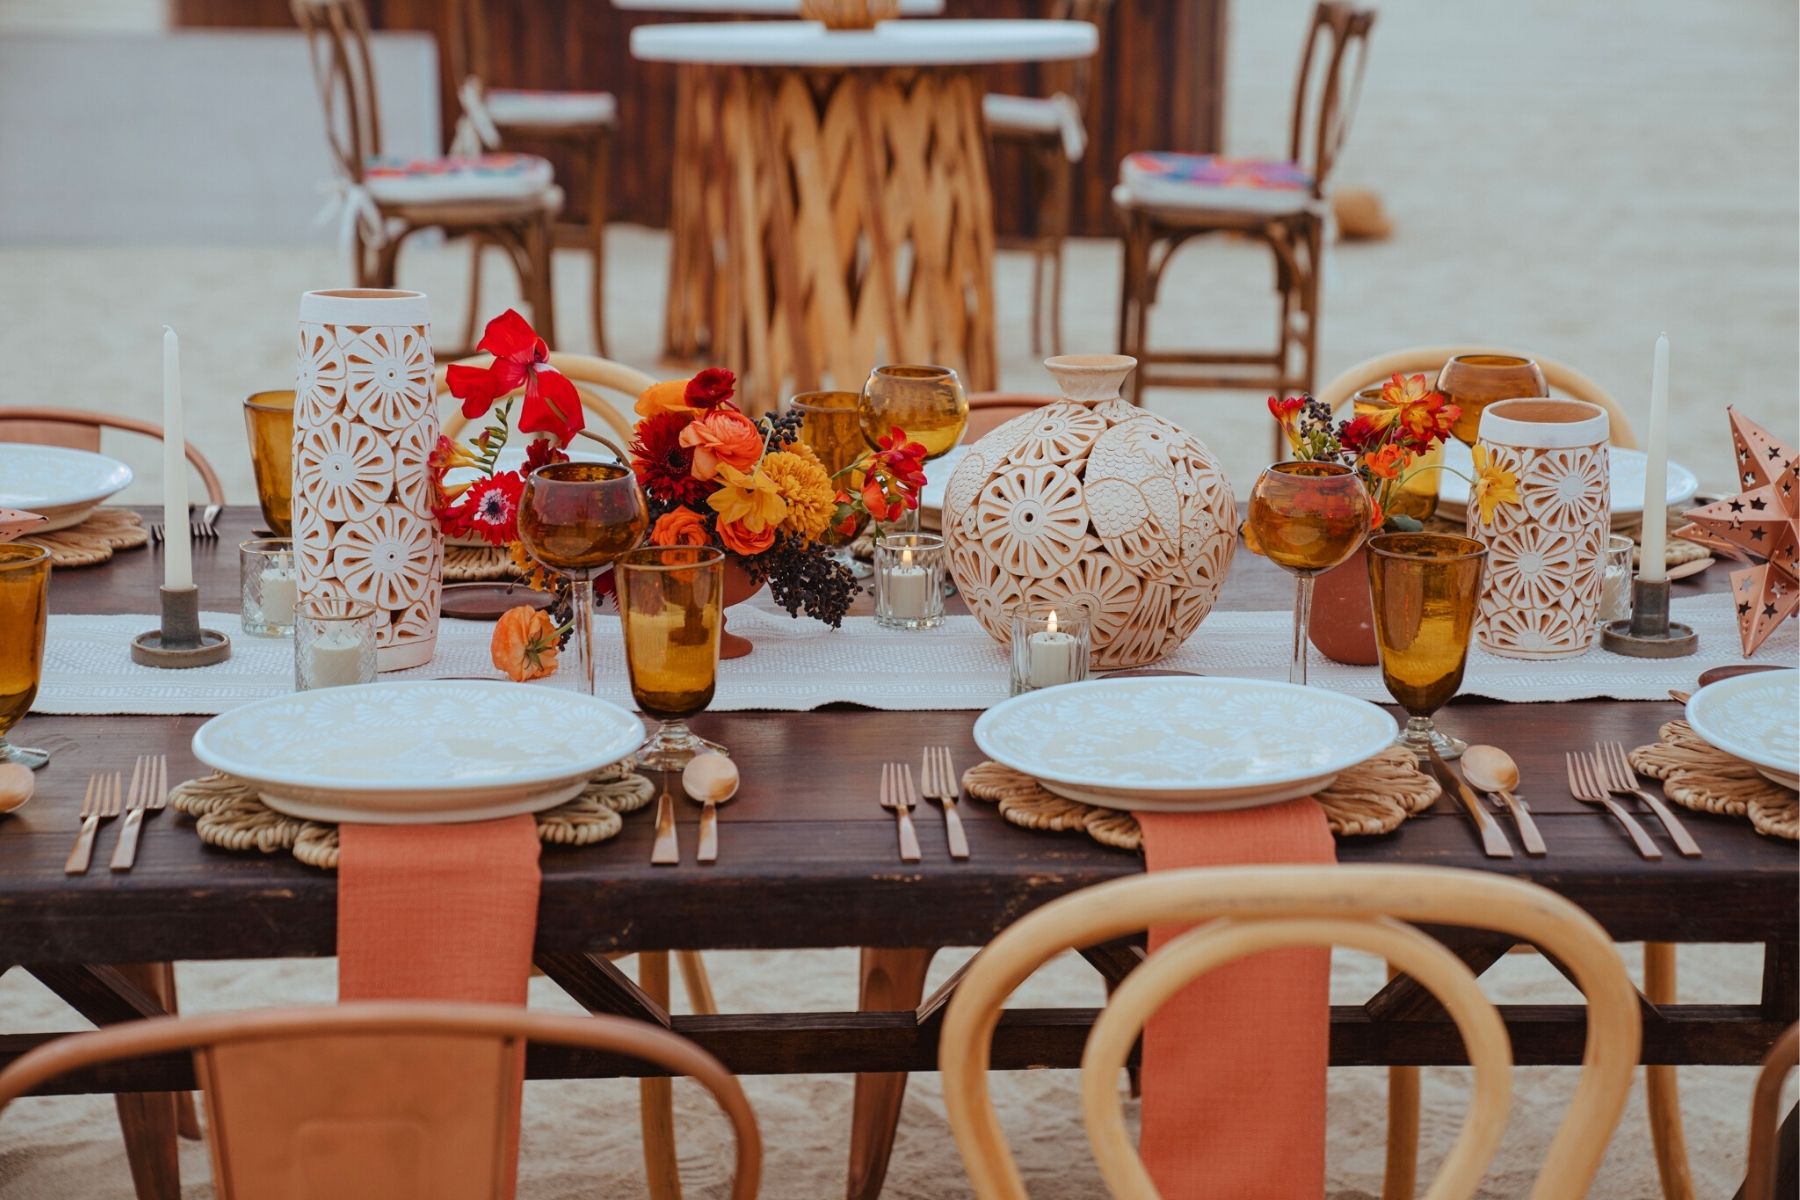 Warm table decoration for a family party in Cabo - Del Cabo Event/ Aria Vera - Yamile Bulos on Thursd